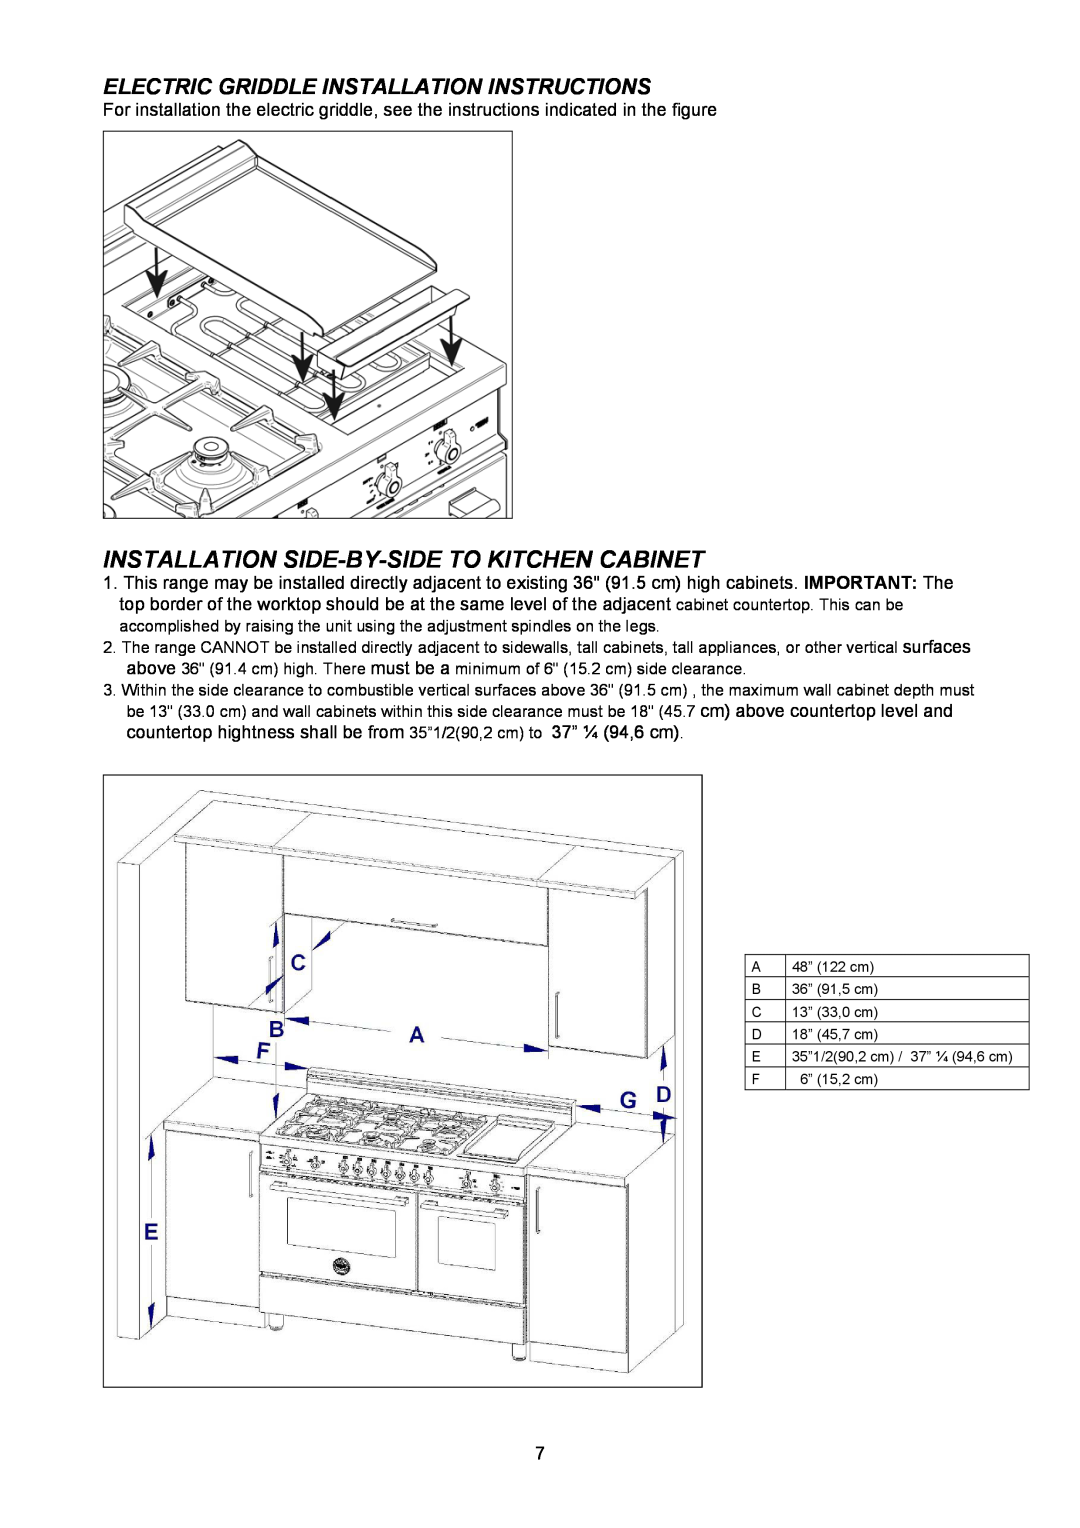 Bertazzoni H48 6G GGV VI Installation Side-By-Side To Kitchen Cabinet, Electric Griddle Installation Instructions 